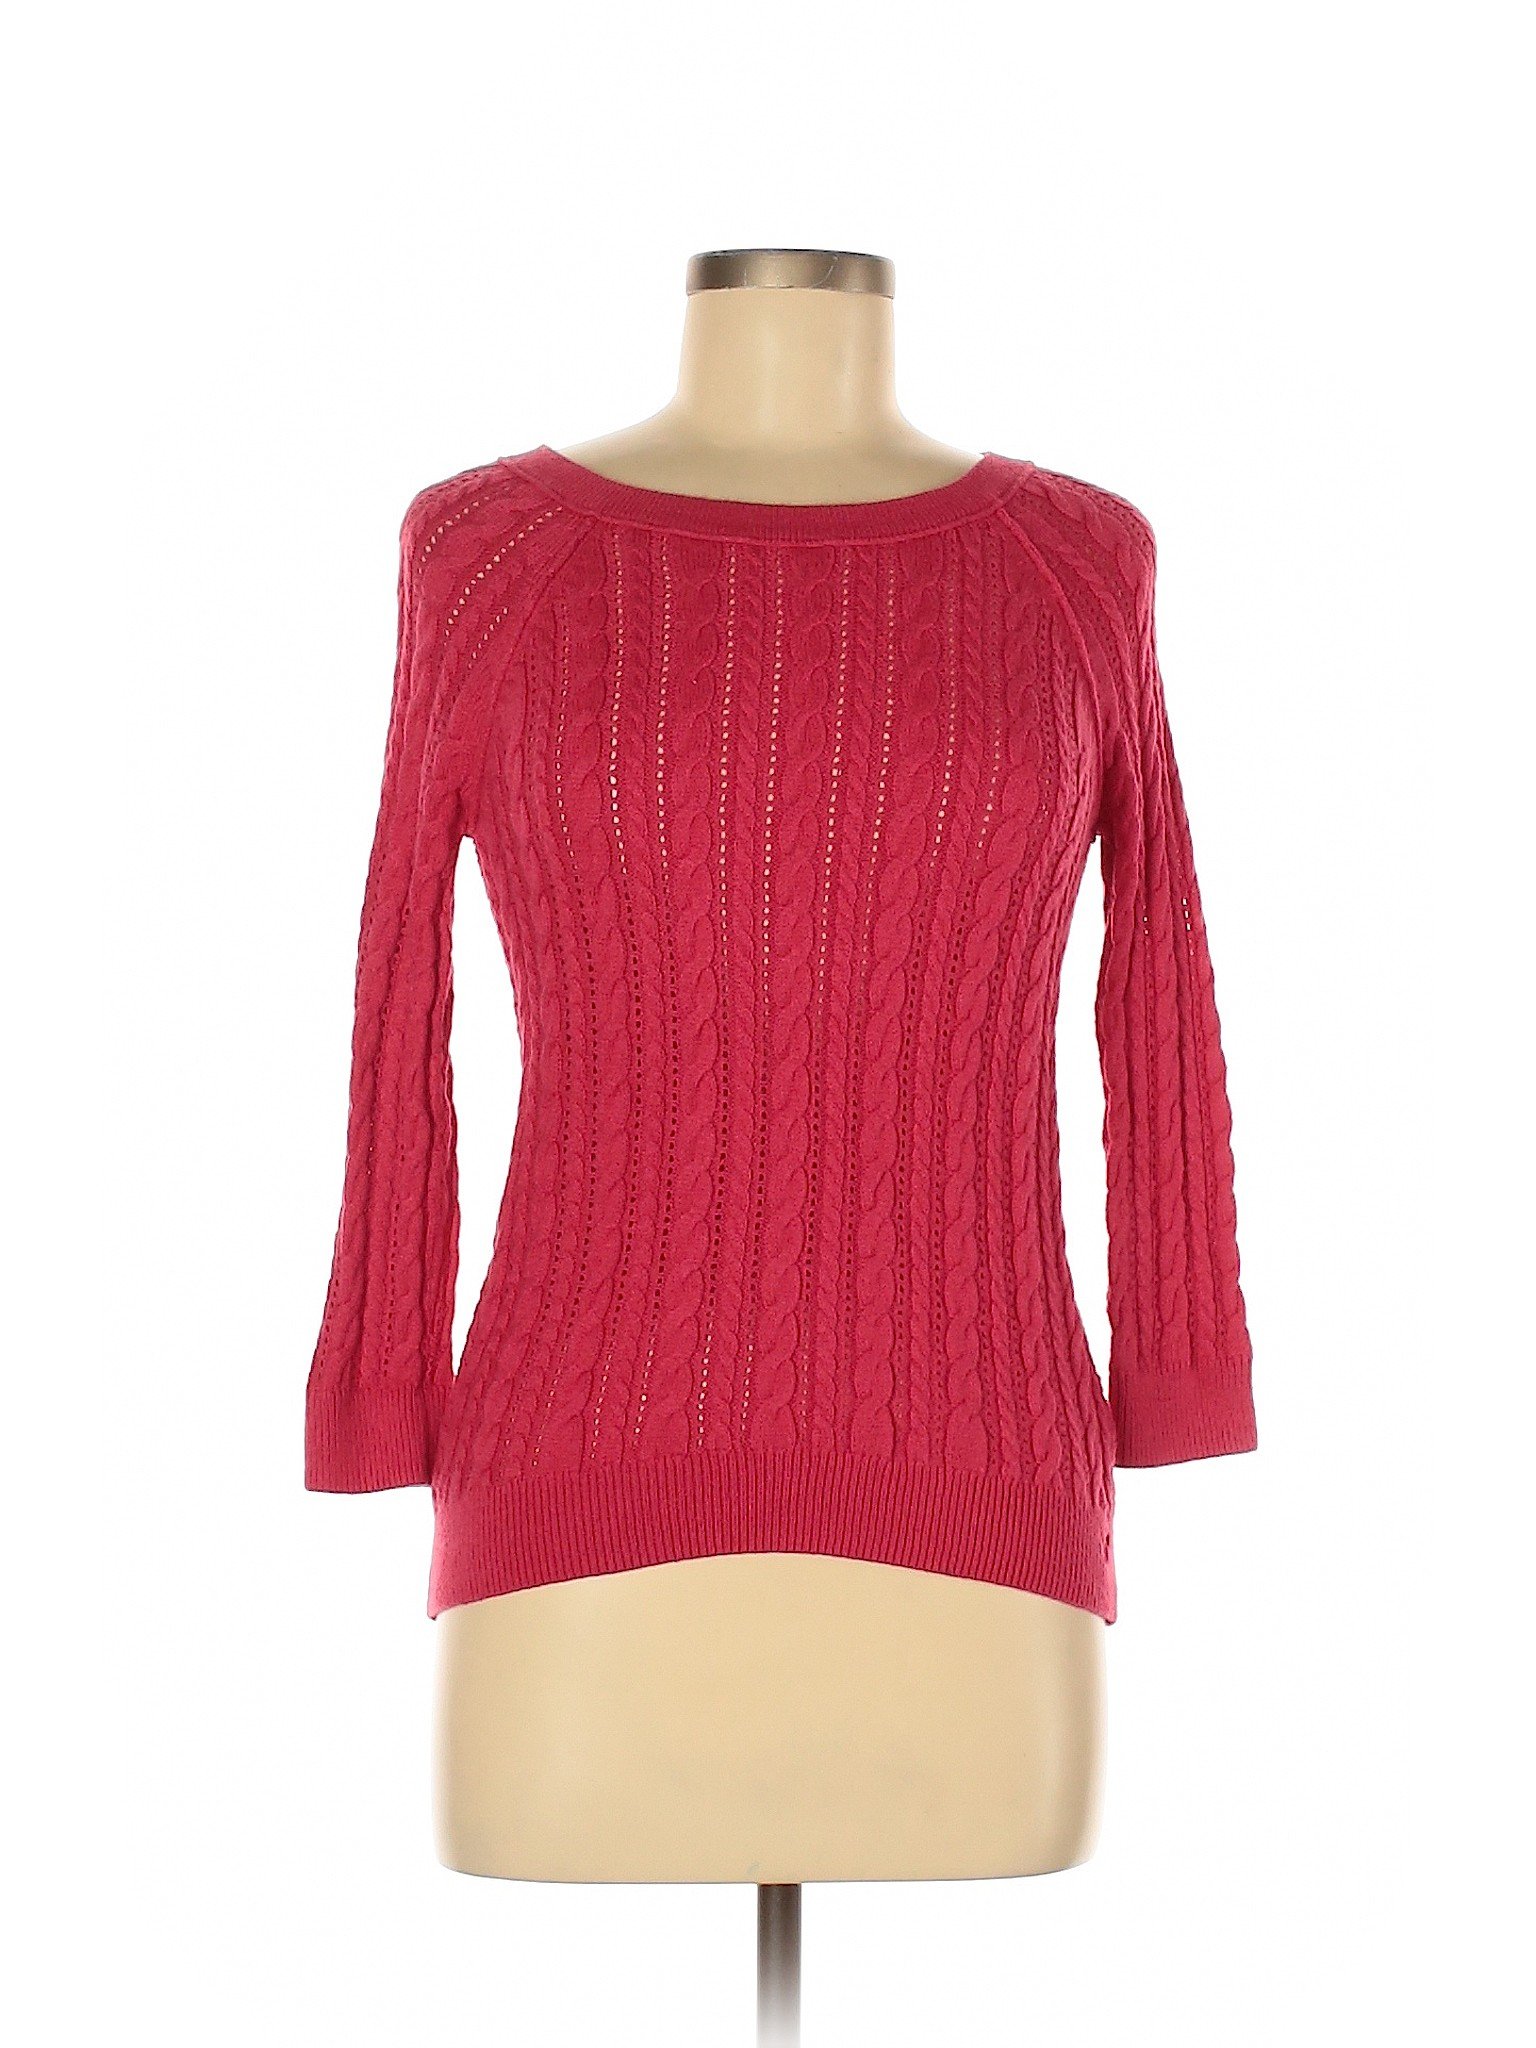 American Eagle Outfitters Women Red Pullover Sweater S Petites | eBay